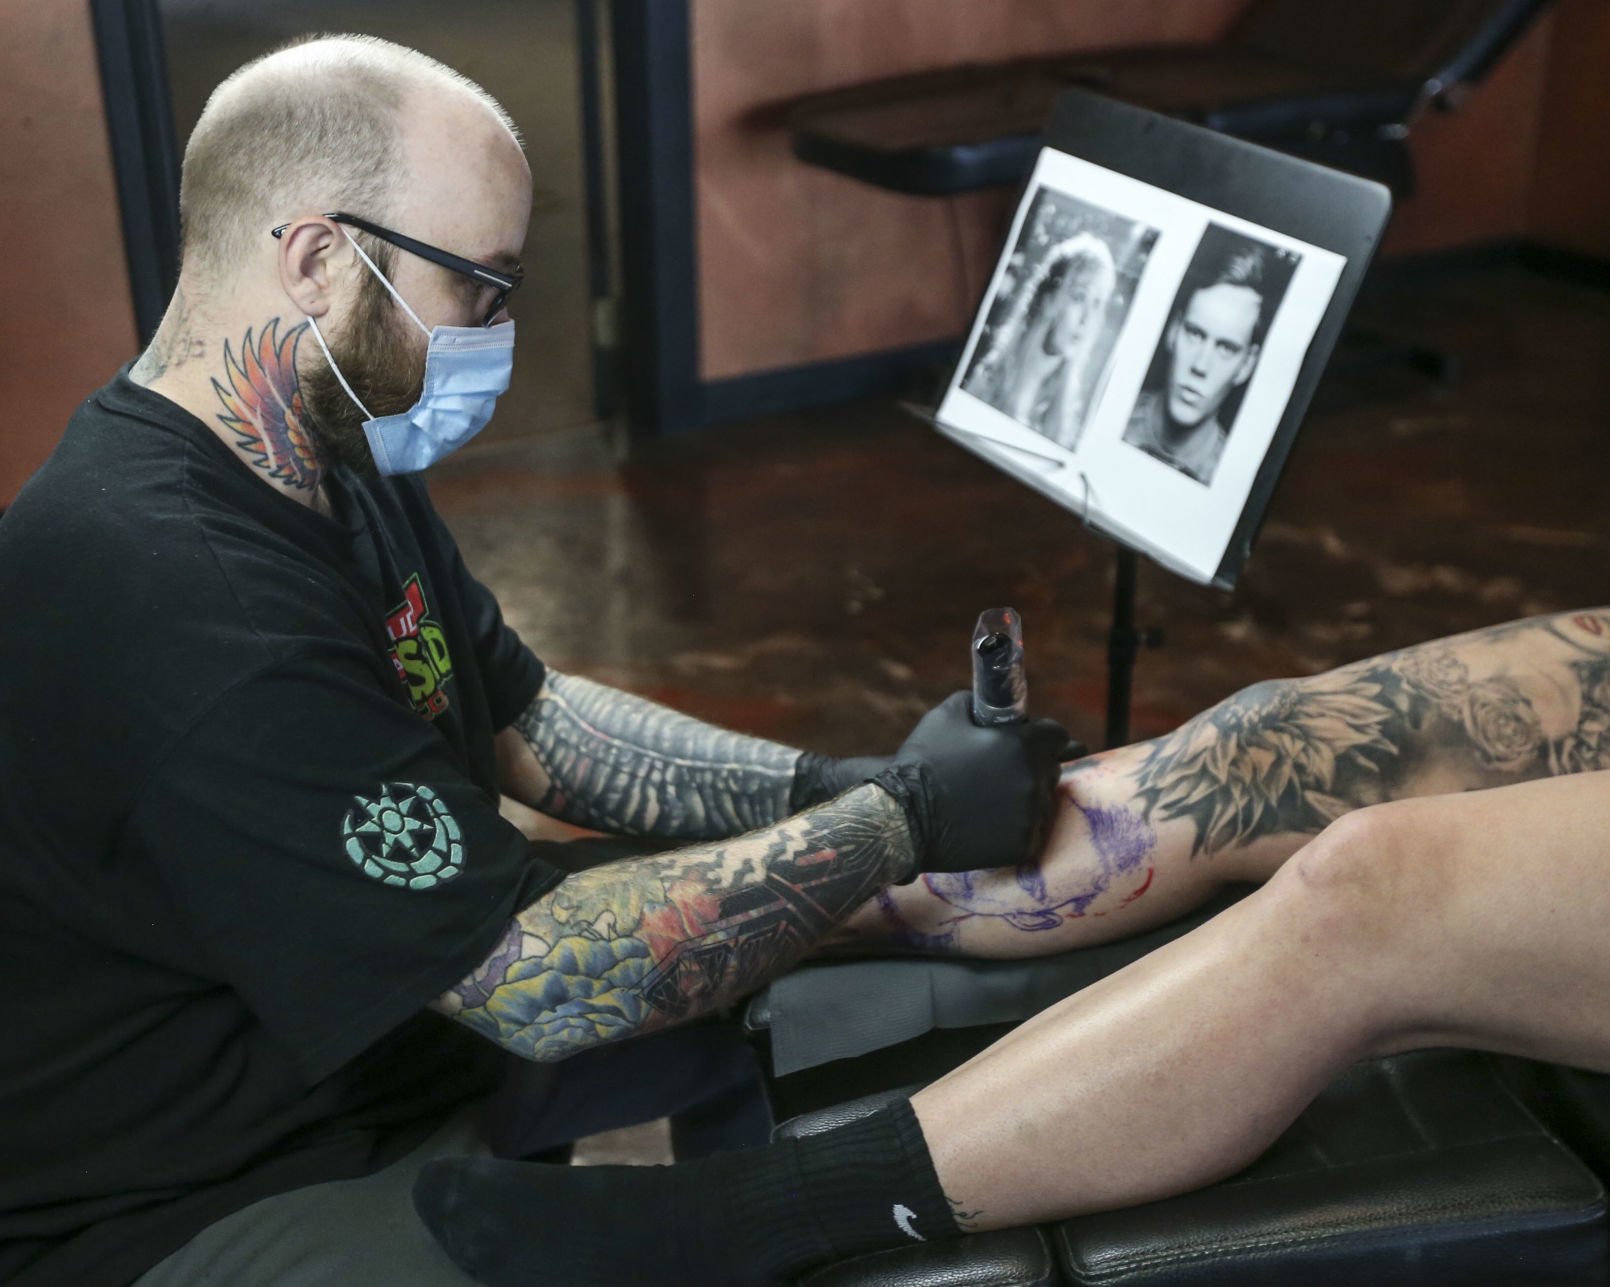 Renegade Tattoo has now shops in West Lafayette and New Concord